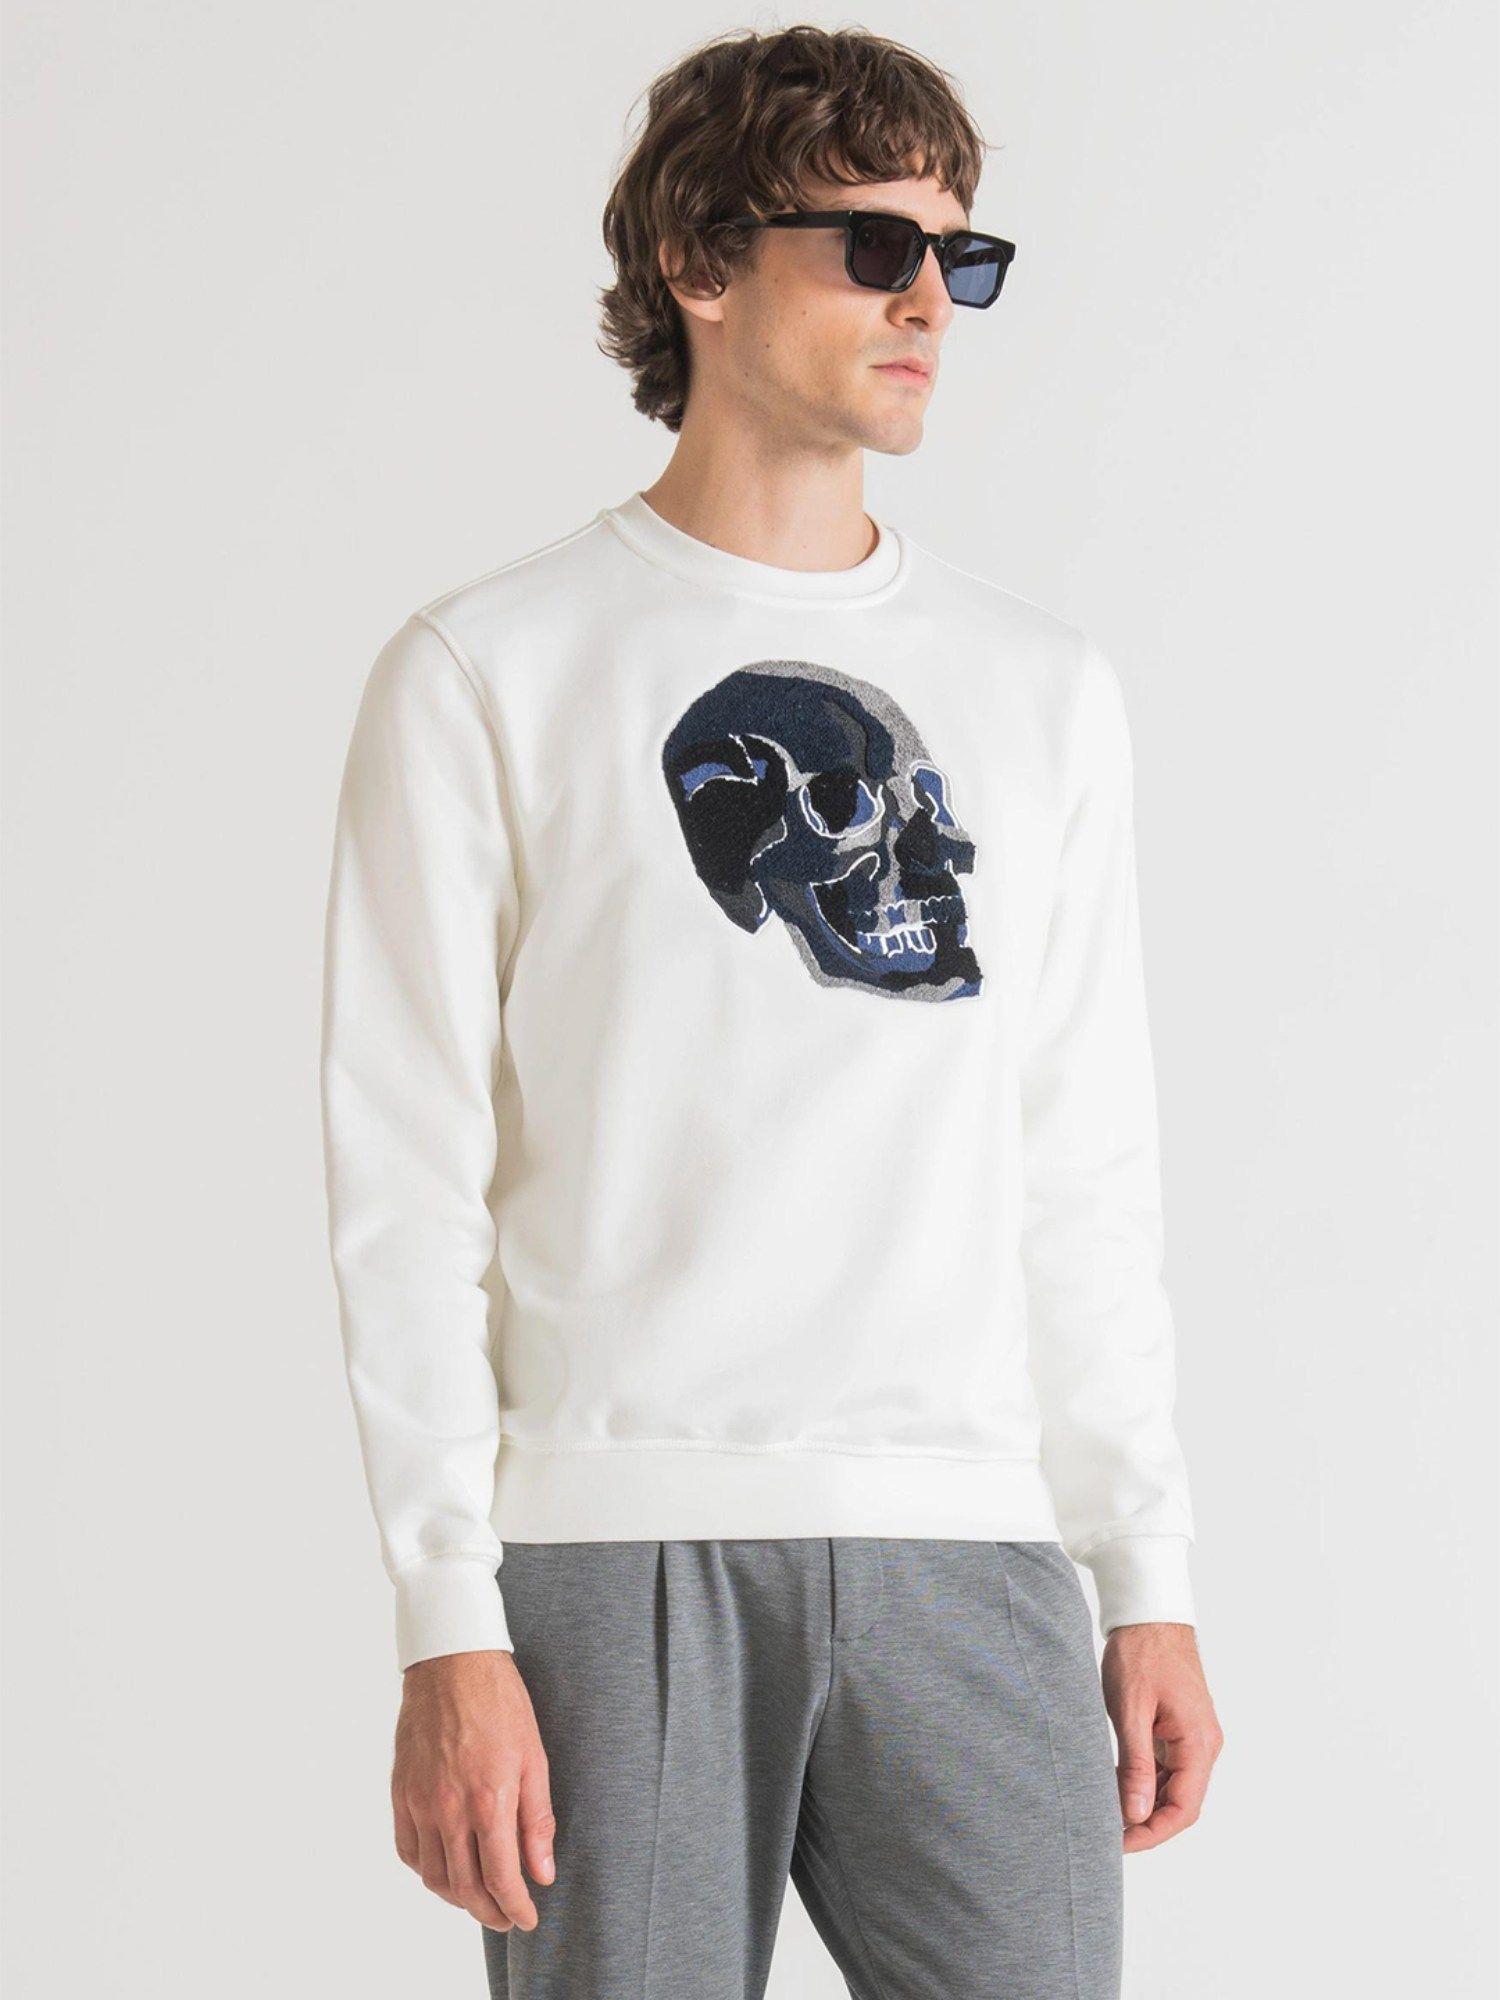 Sweatshirt Regular Fit In Cotton Polyester Blend Fabric With Embroidered Skull